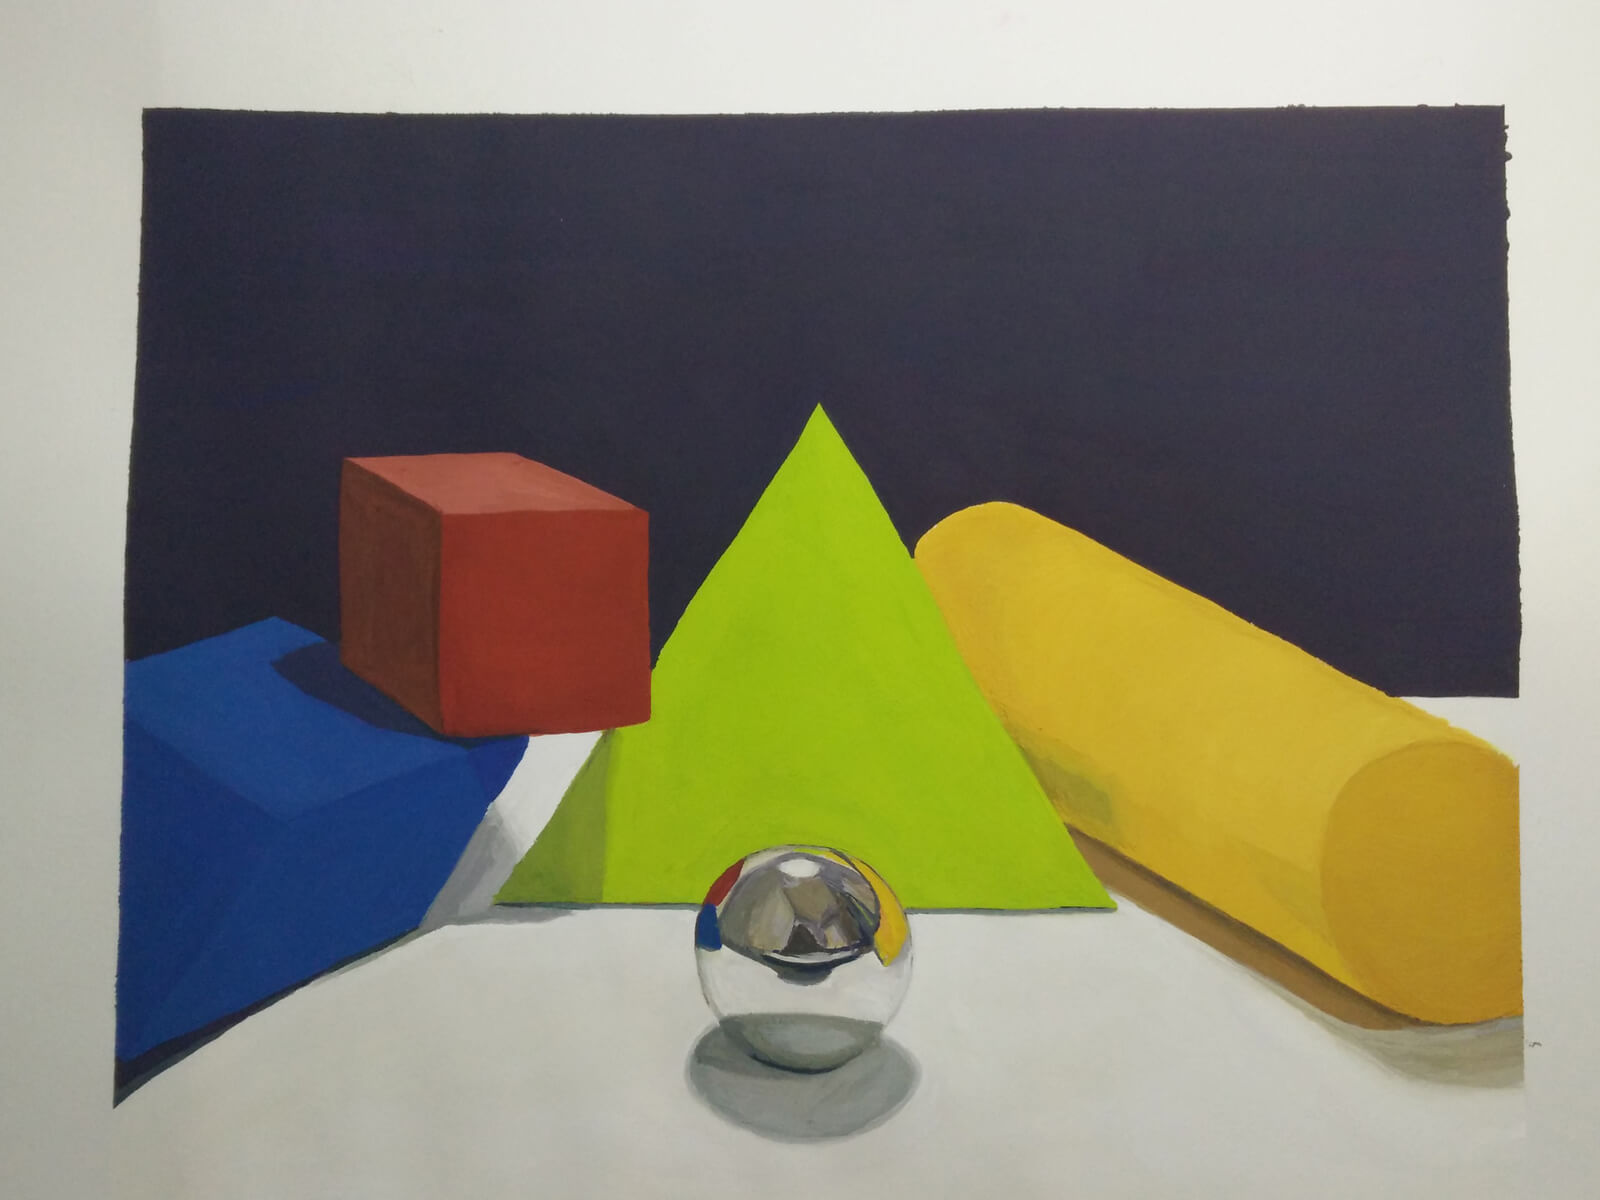 still-life traditional painting of a silver ball surrounded by primary-colored blocks in various geometric shapes